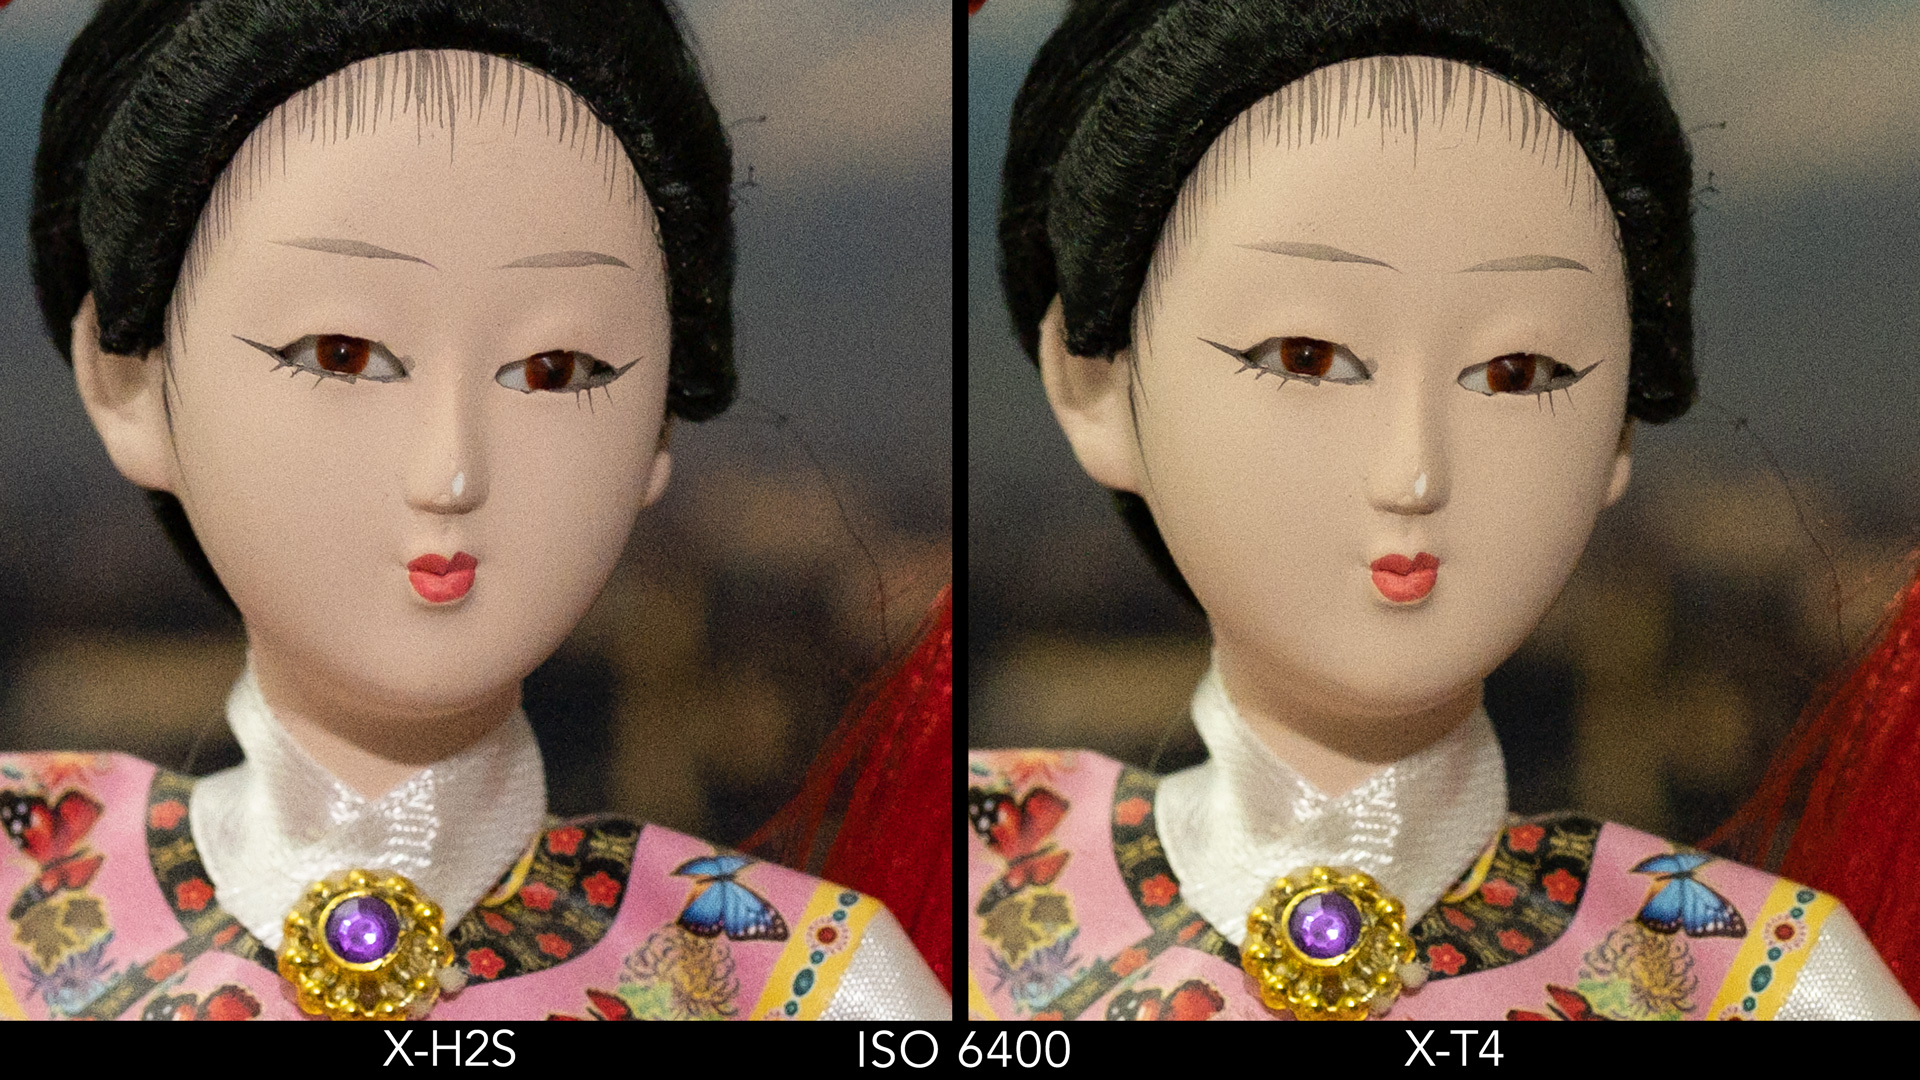 Side by side crop of the Japanese doll, showing the quality at ISO 6400 for the X-H2S and X-T4